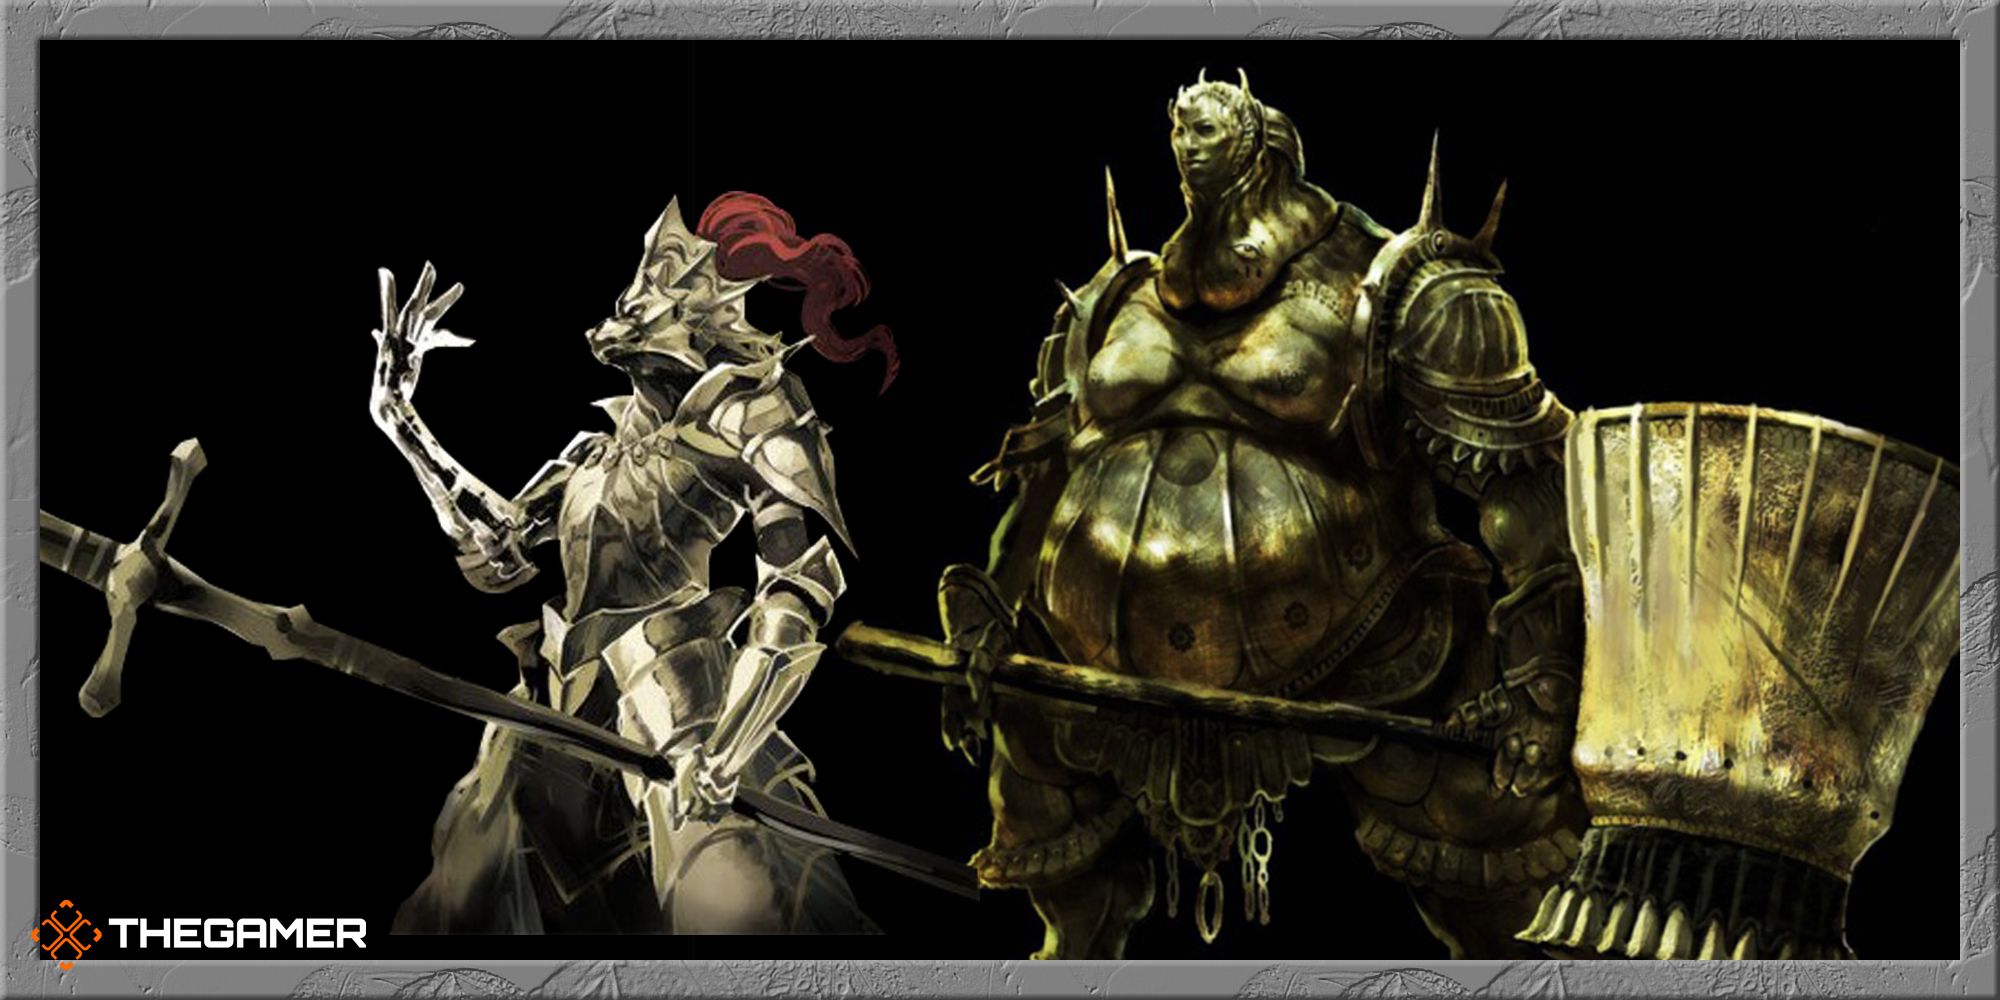 Game image of Ornstein & Smough from Dark Souls.